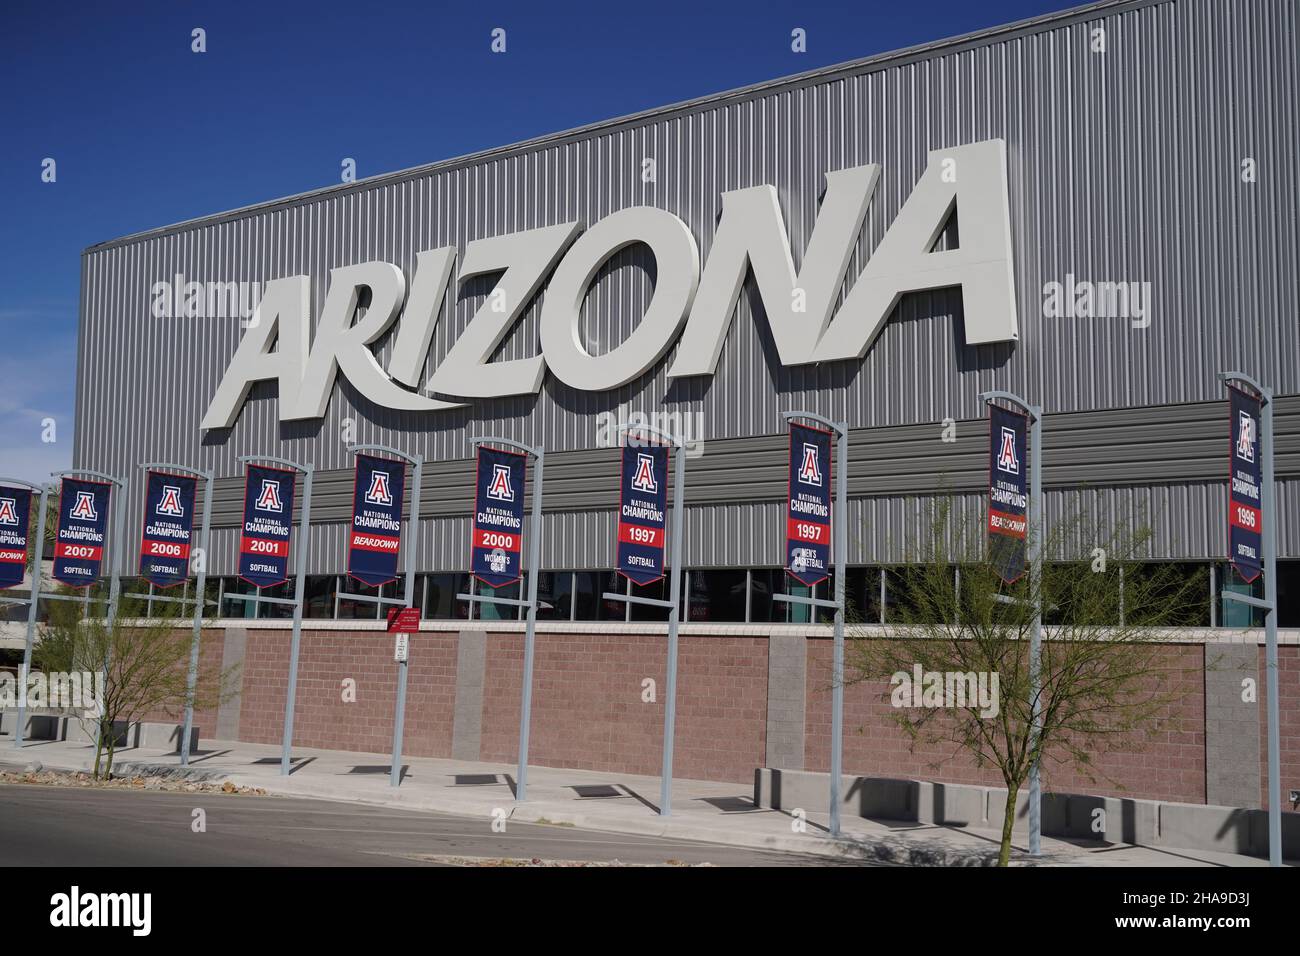 Arizona Wildcats NCAA championship banners for softball (1996, 1997 and 2001), men's basketball (1997)  women's golf (2000) are seen at the Cole and J Stock Photo